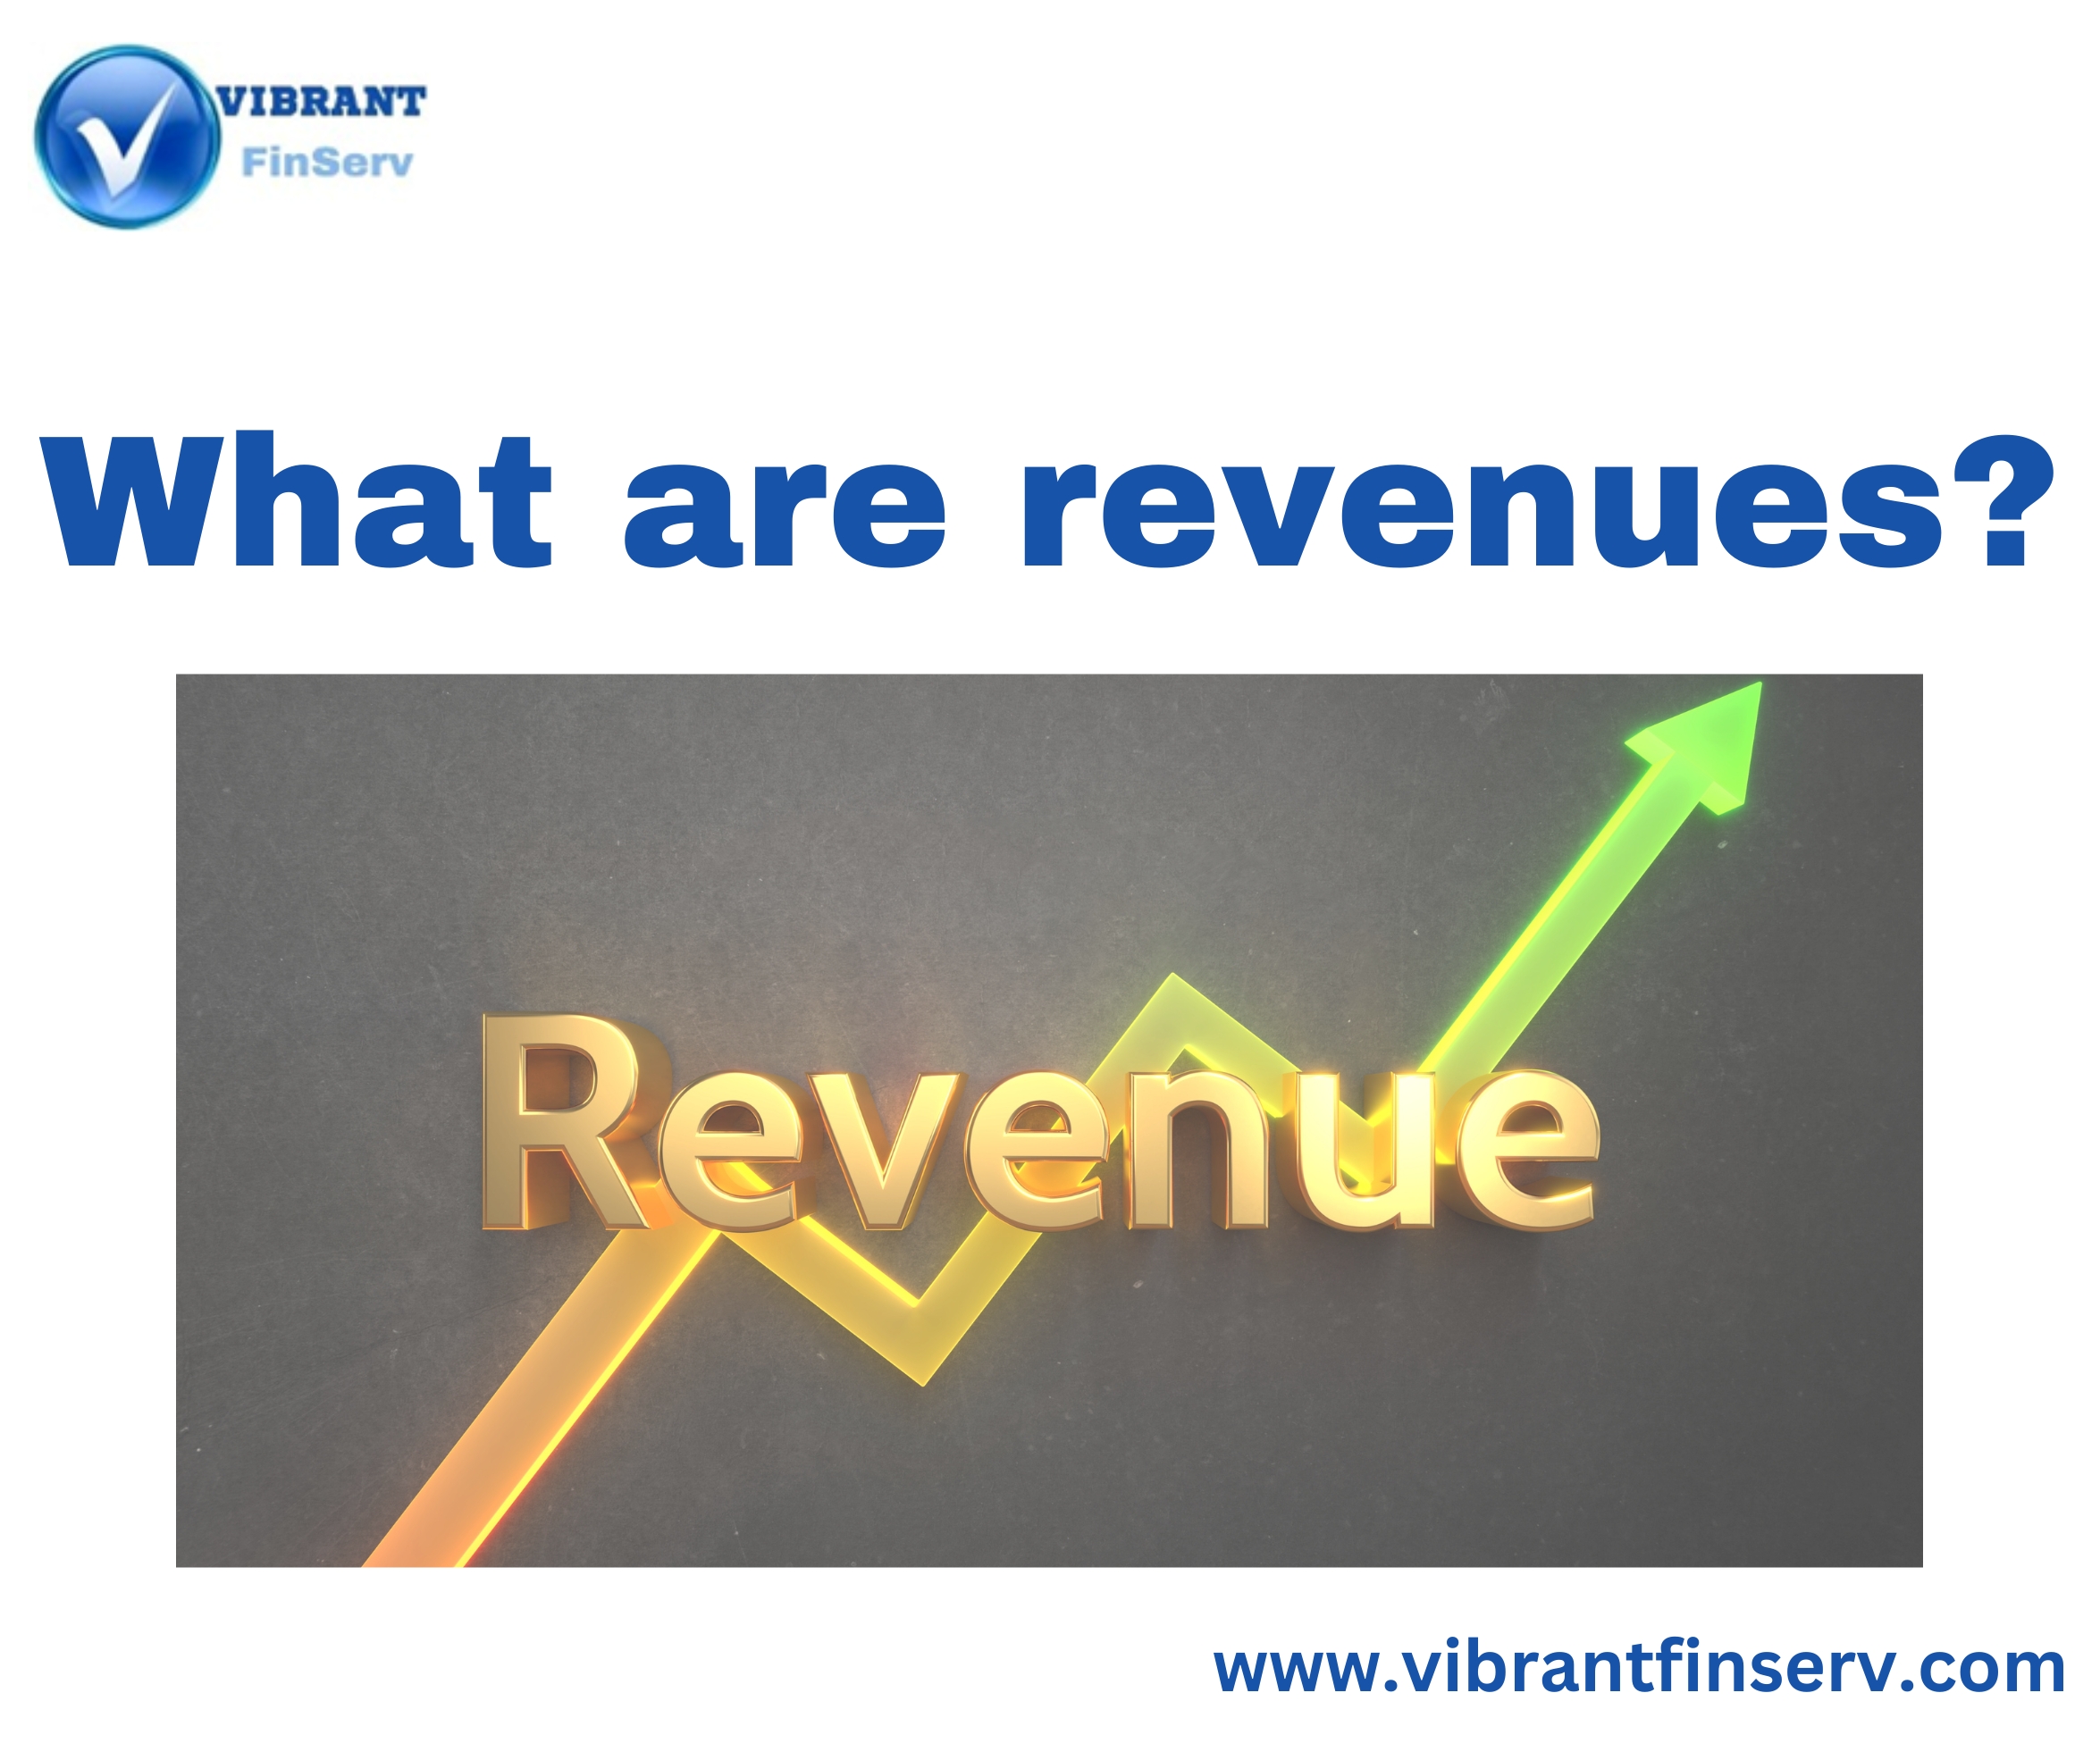 Definition of Revenues